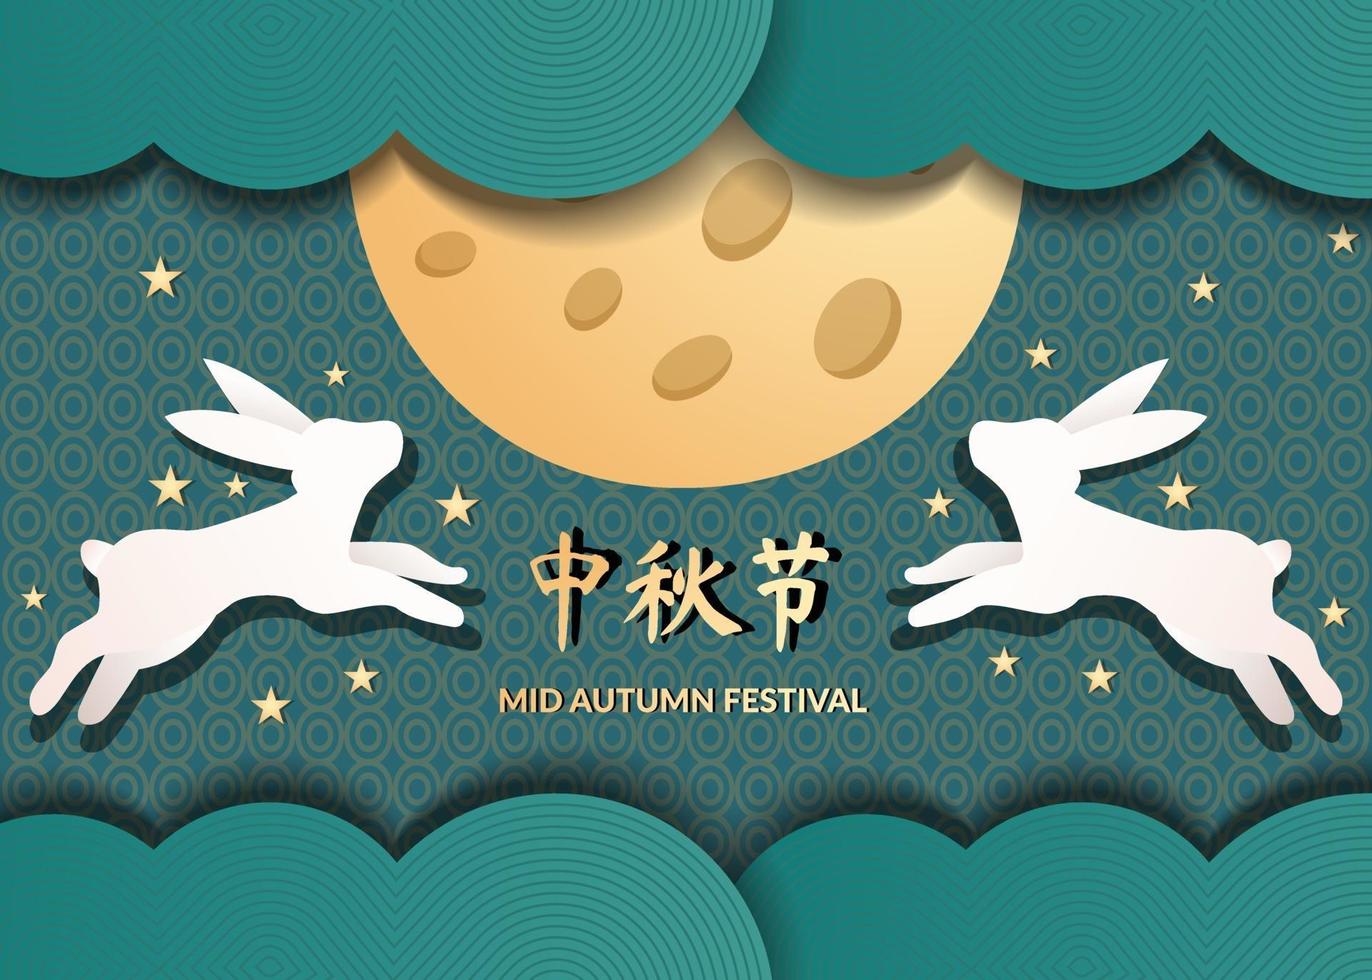 mid autumn festival with flying rabbit on the moon in paper cut style vector